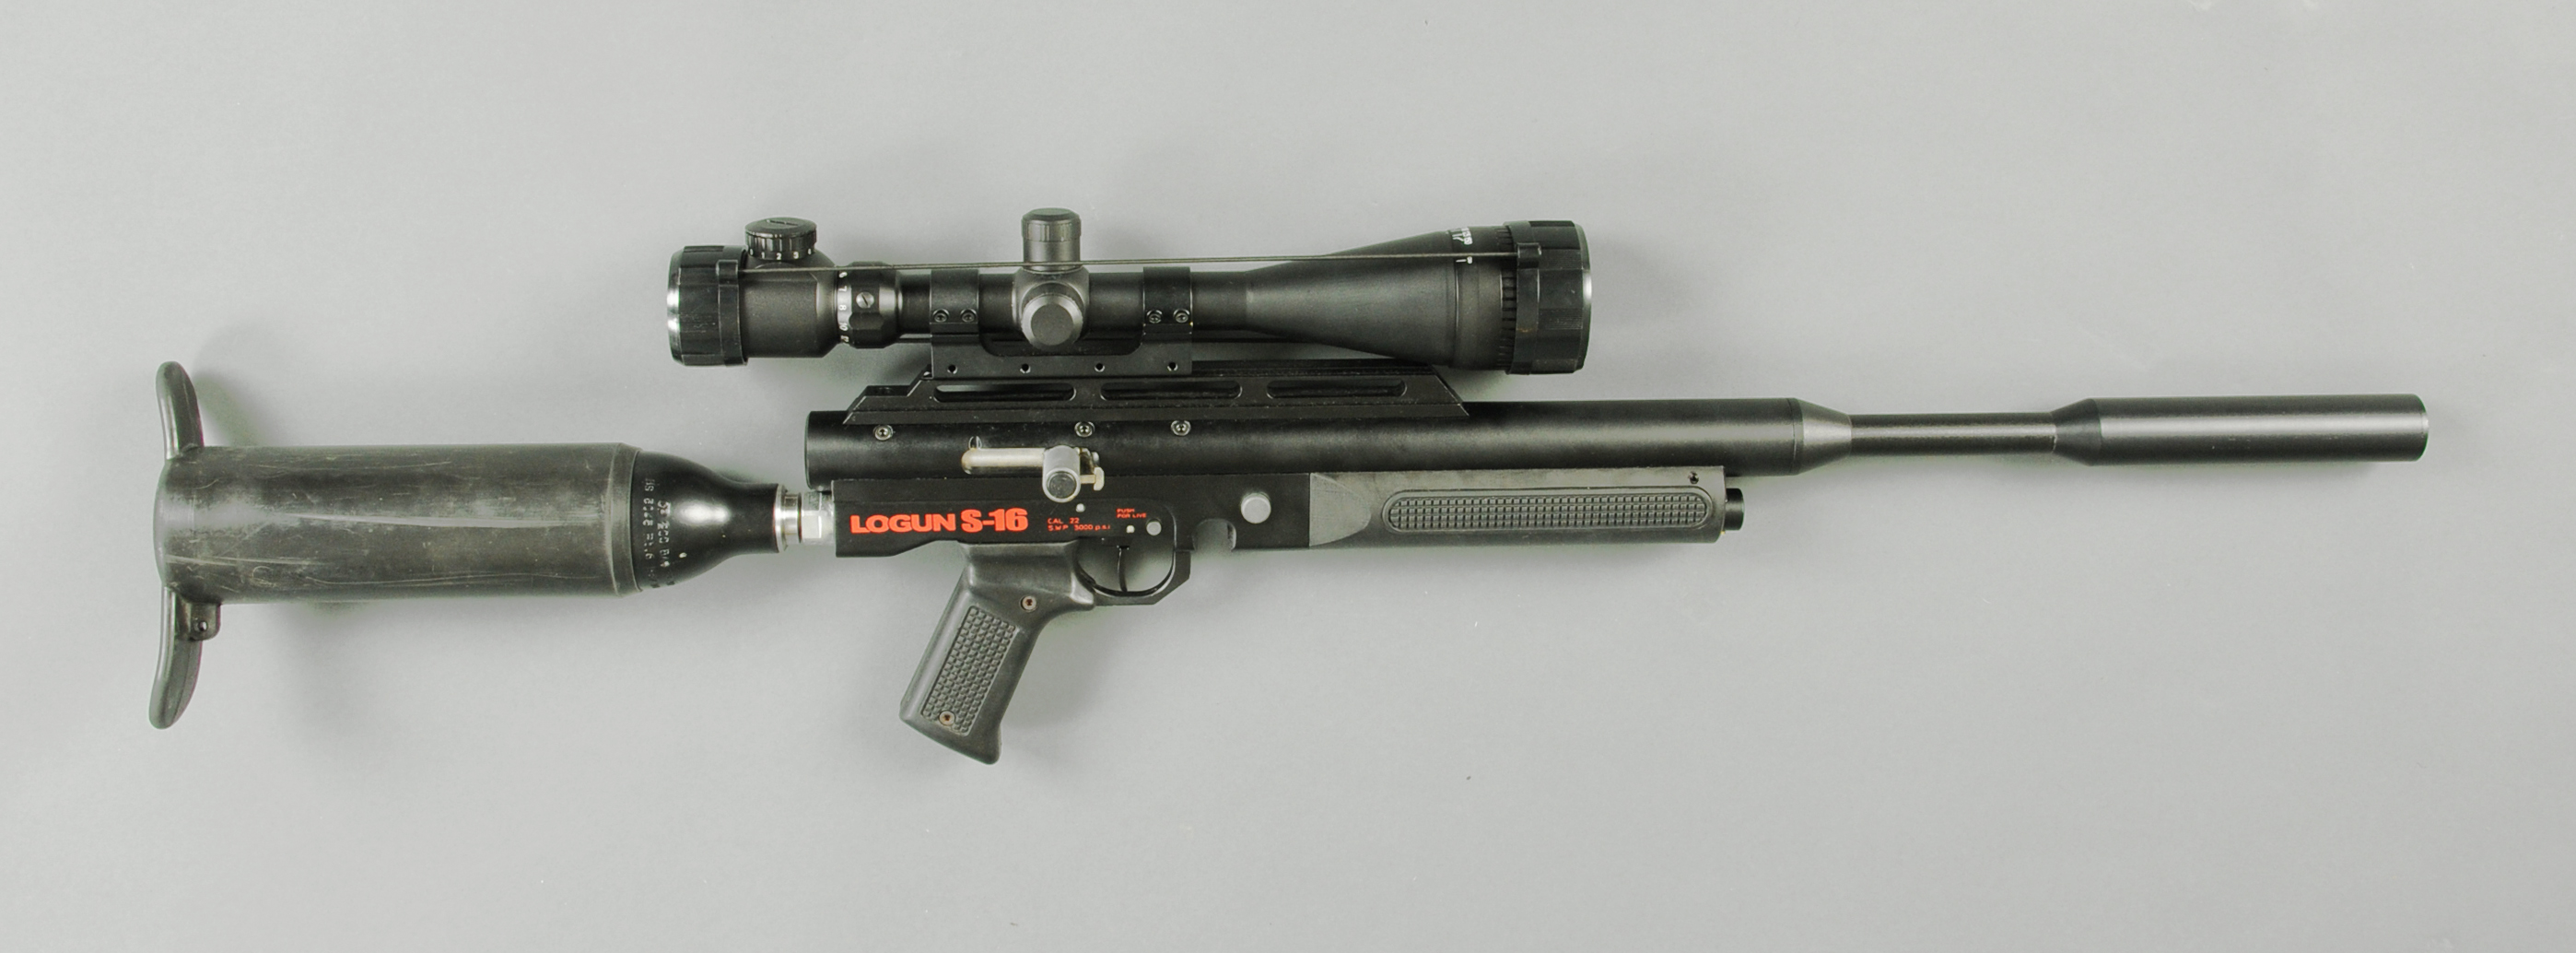 Logun S-16.22 pre-charged air rifle, complete with magazine, sound moderator, red dot laser